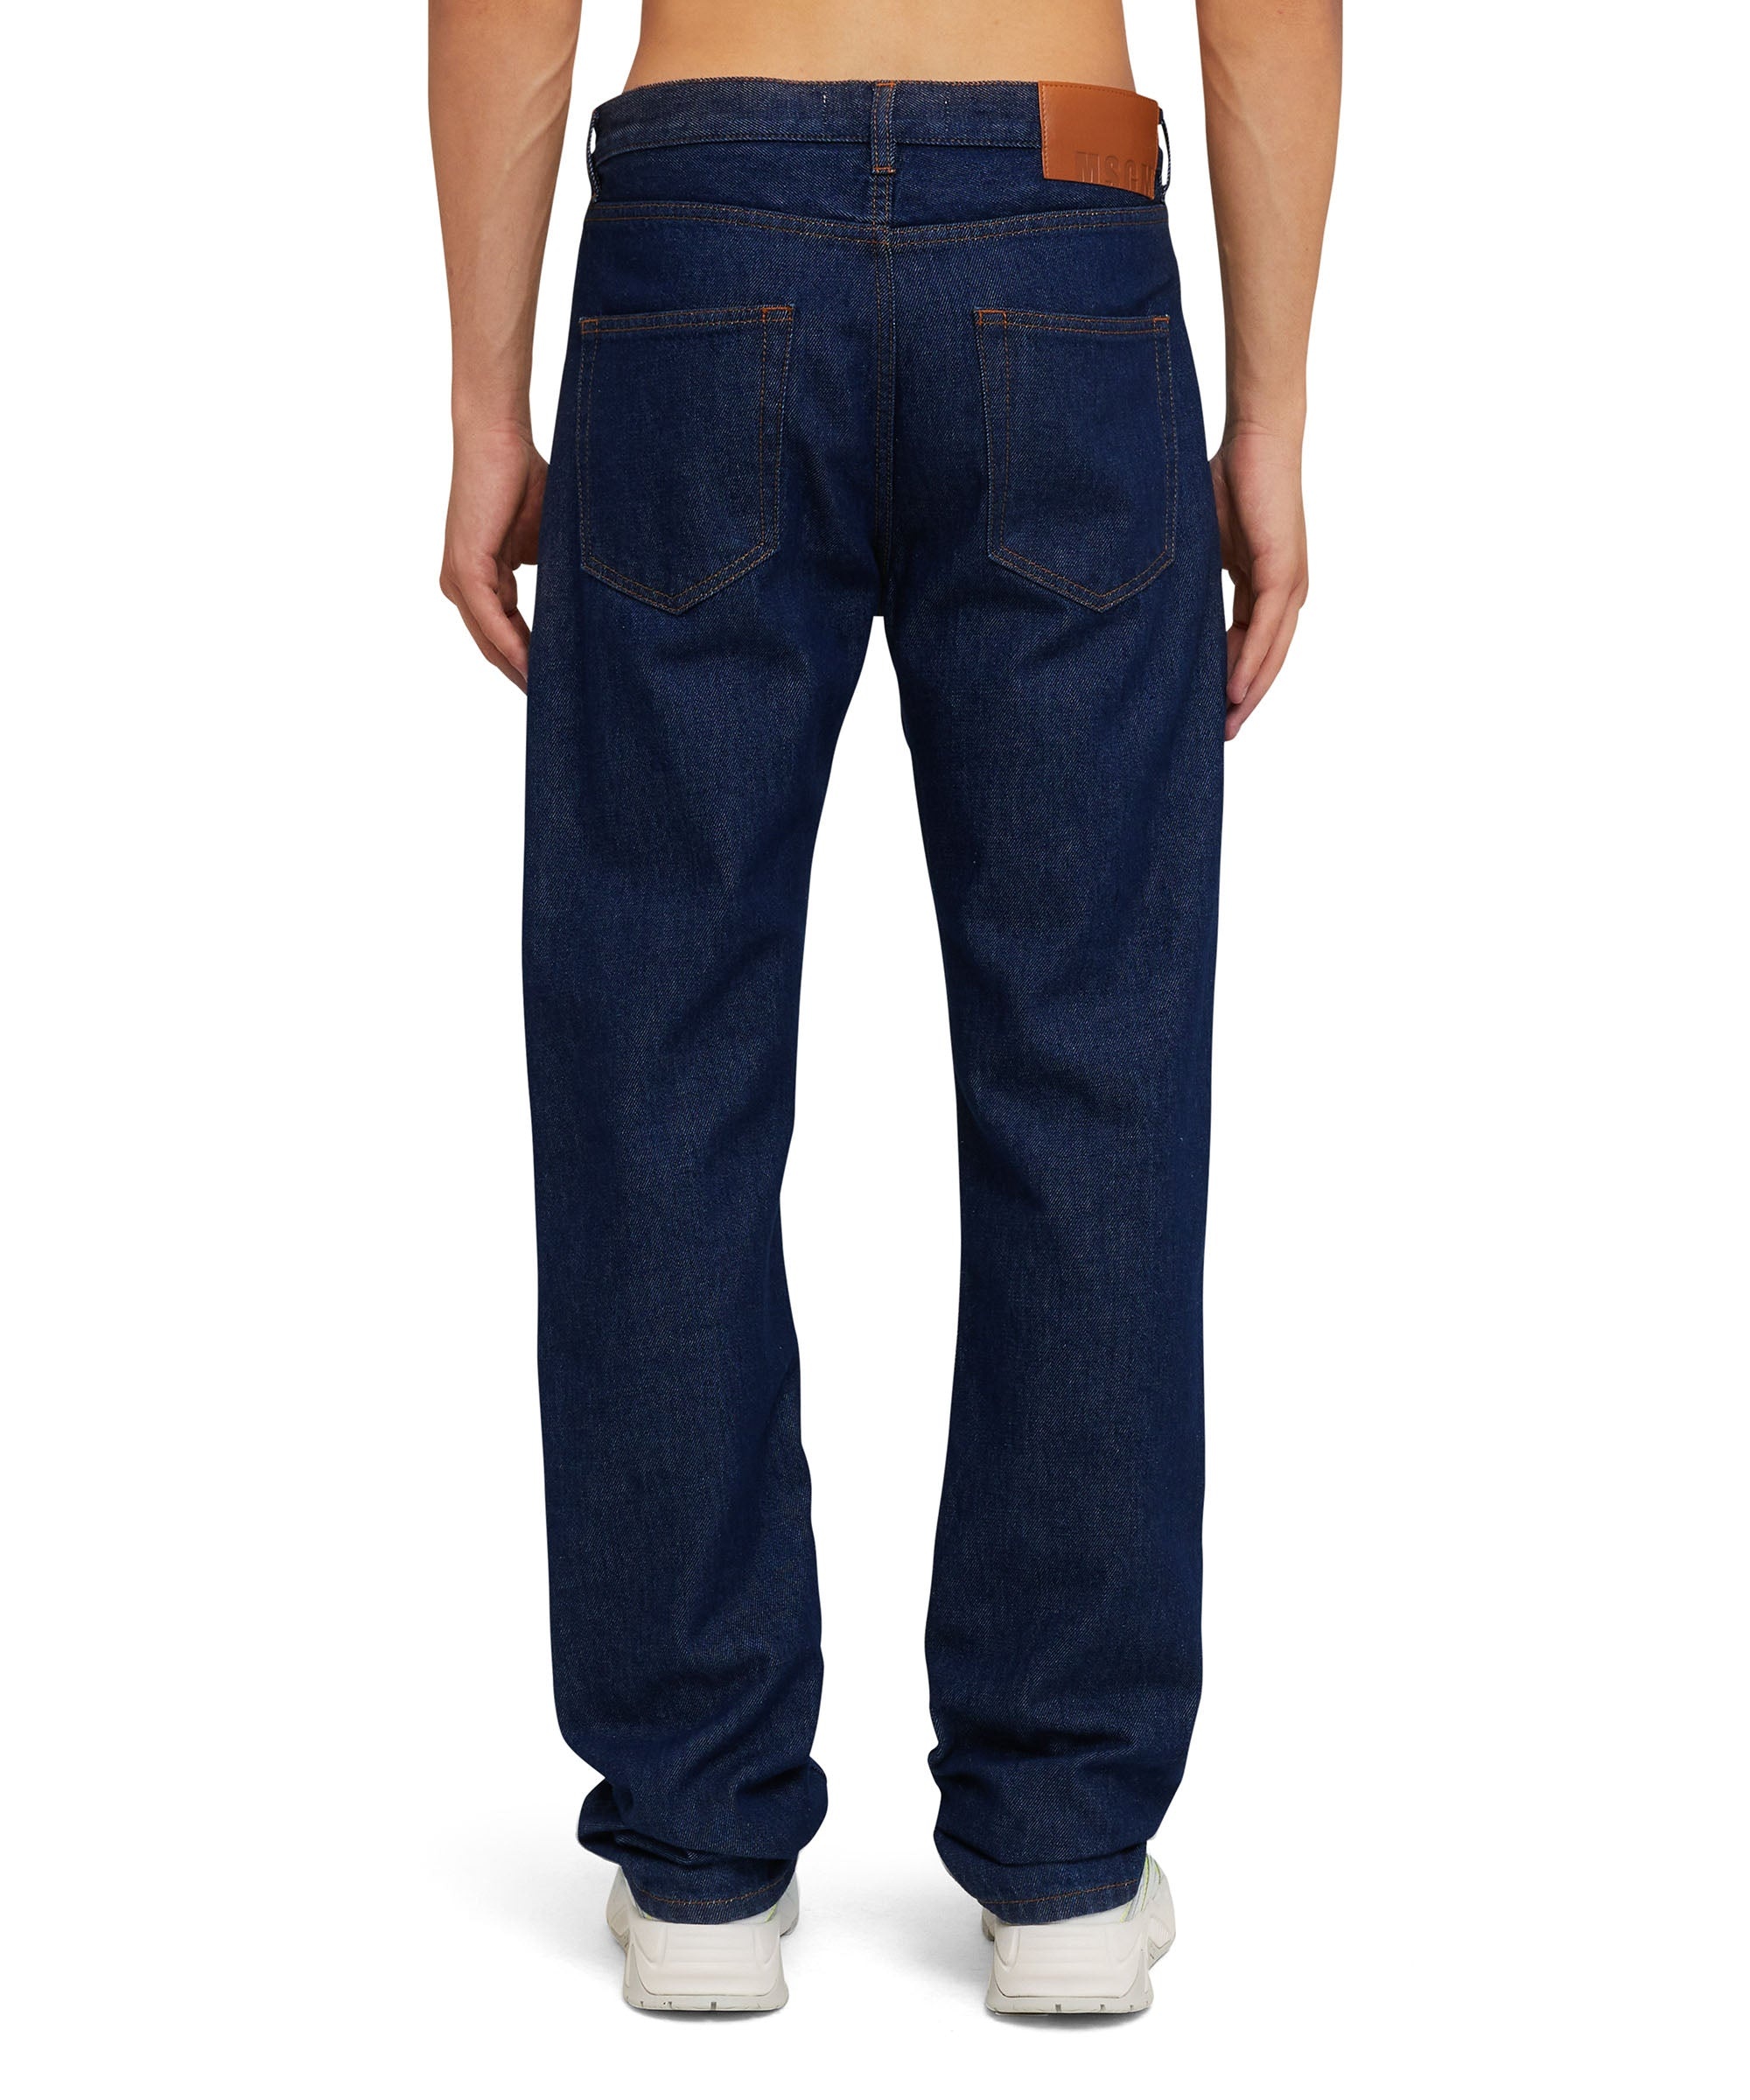 Solid color tailored jeans with straight legs - 3